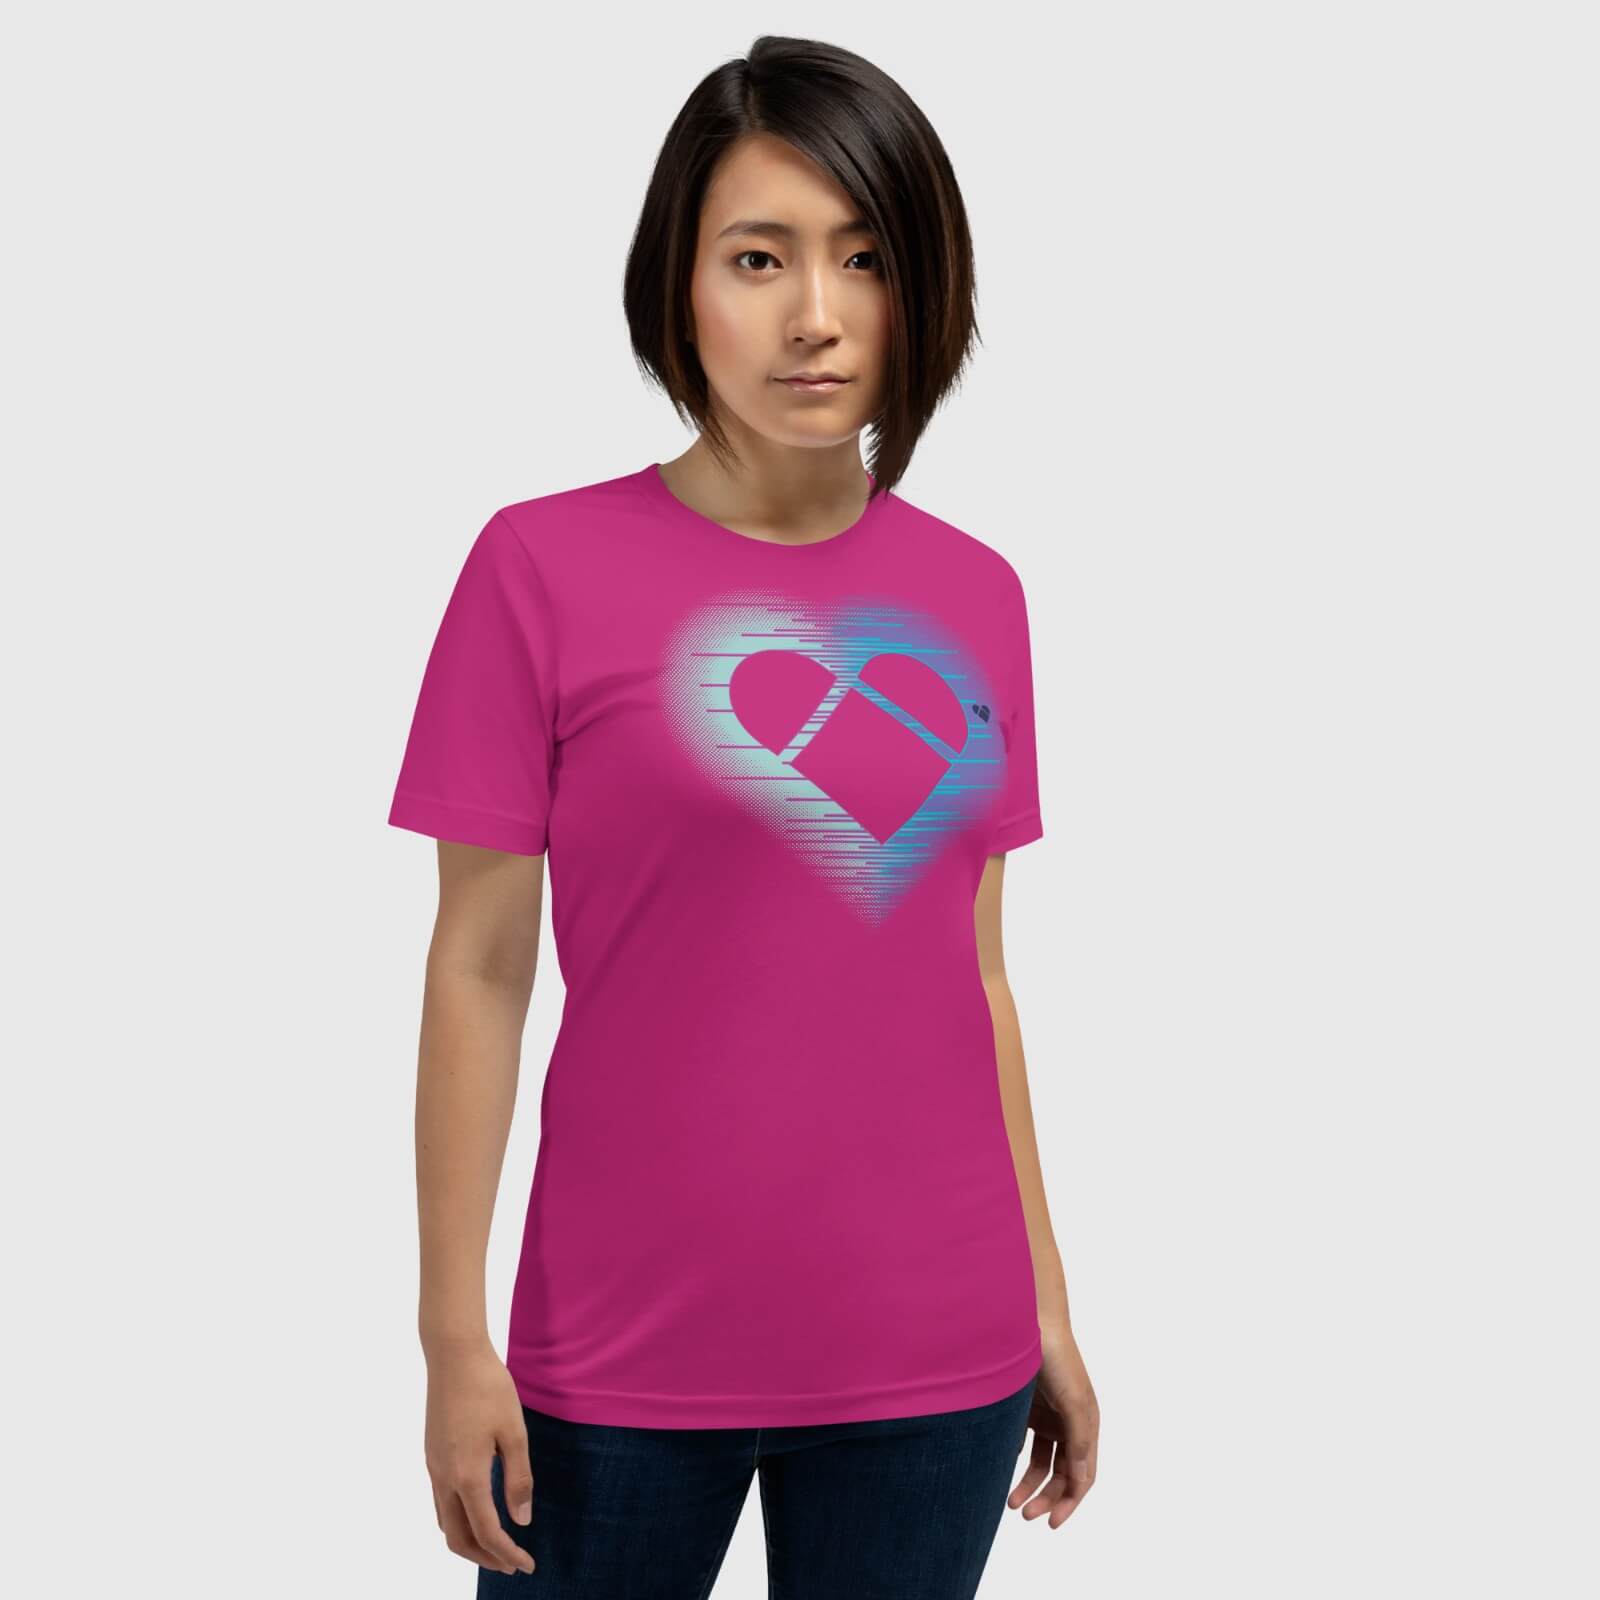 Amor Dual Capsule Collection Pink Tee for Creative Wardrobe Choices